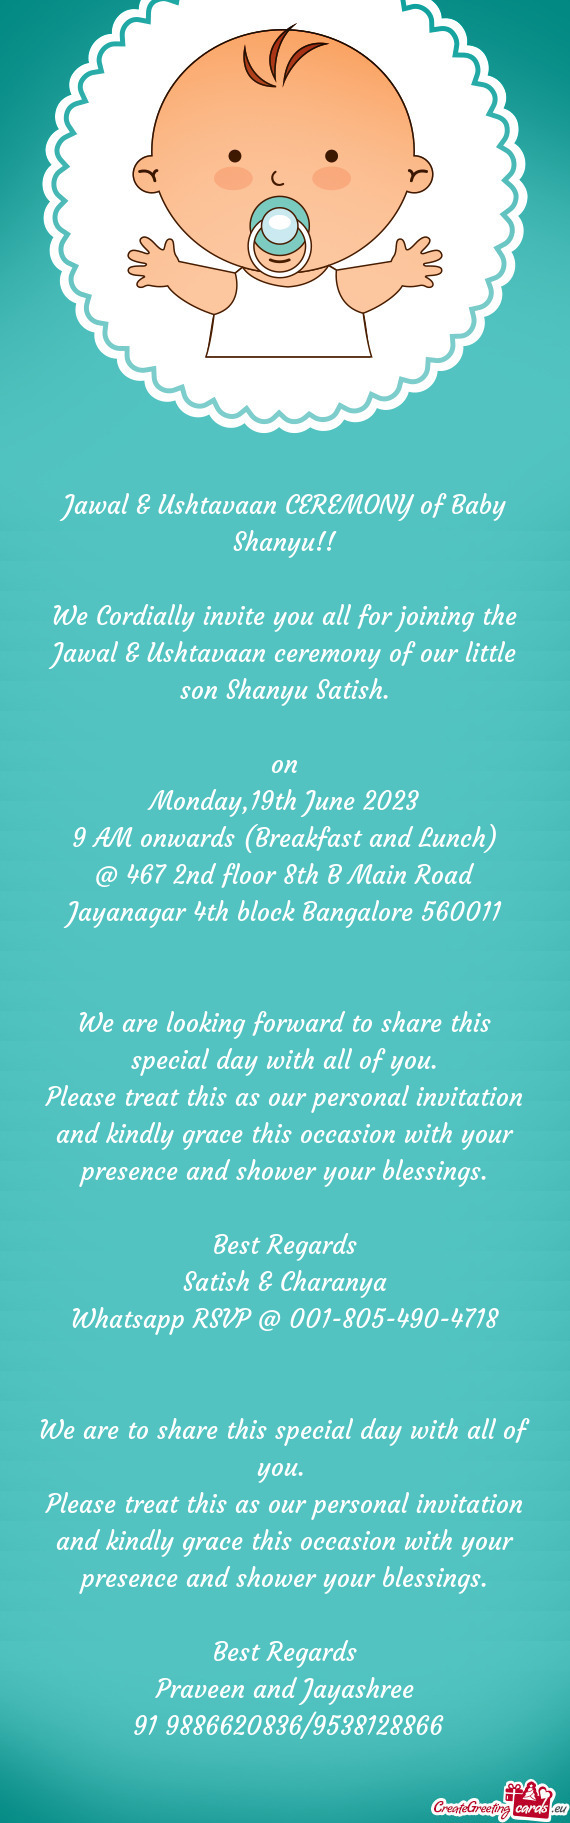 We Cordially invite you all for joining the Jawal & Ushtavaan ceremony of our little son Shanyu Sati